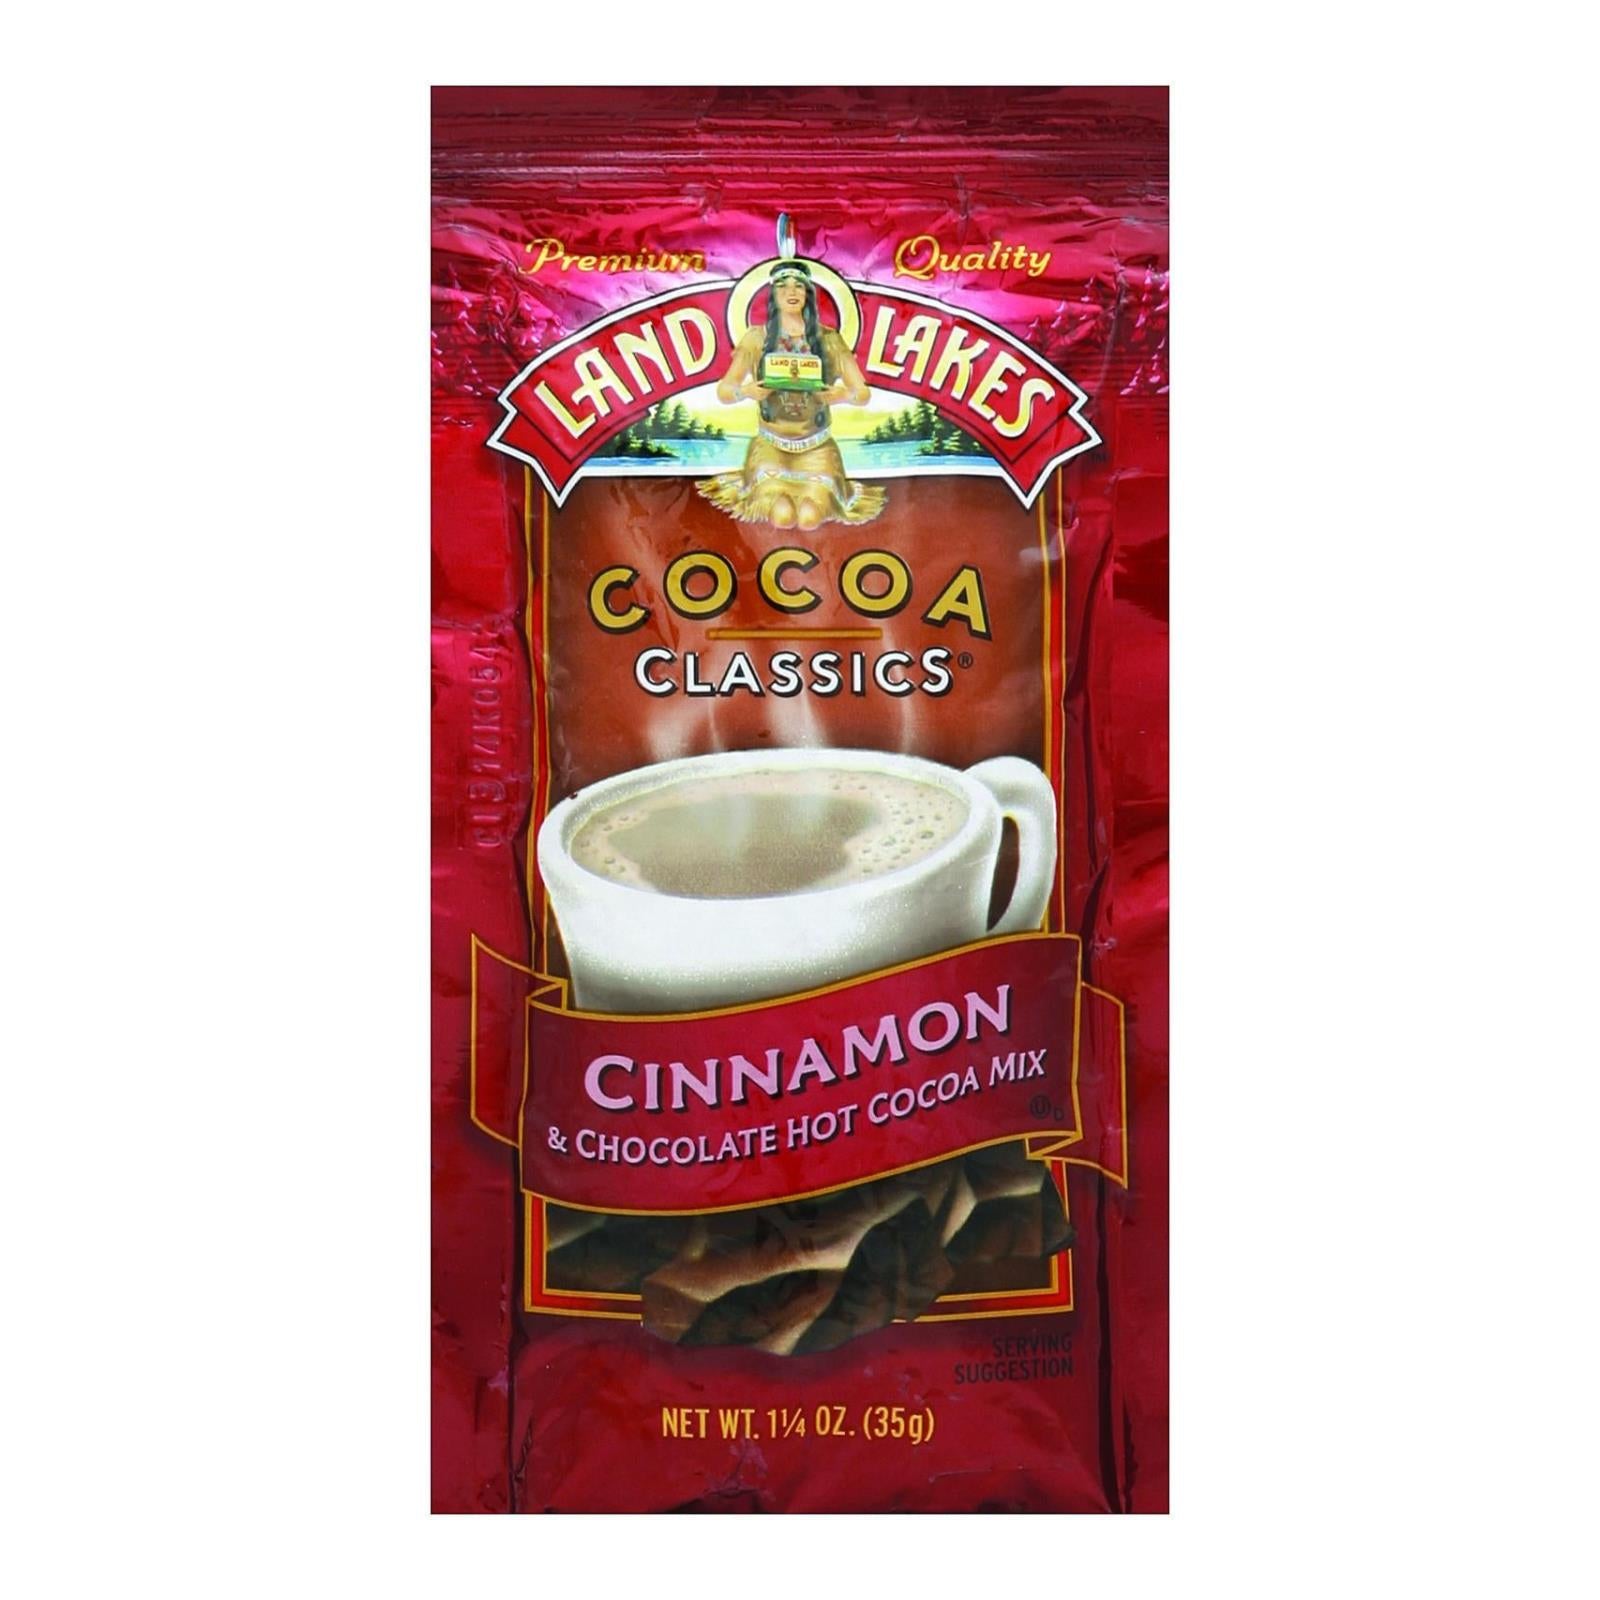 Land O Lakes Cocoa Classic Mix - Cinnamon And Chocolate - 1.25 Oz - Case Of 12 - Whole Green Foods